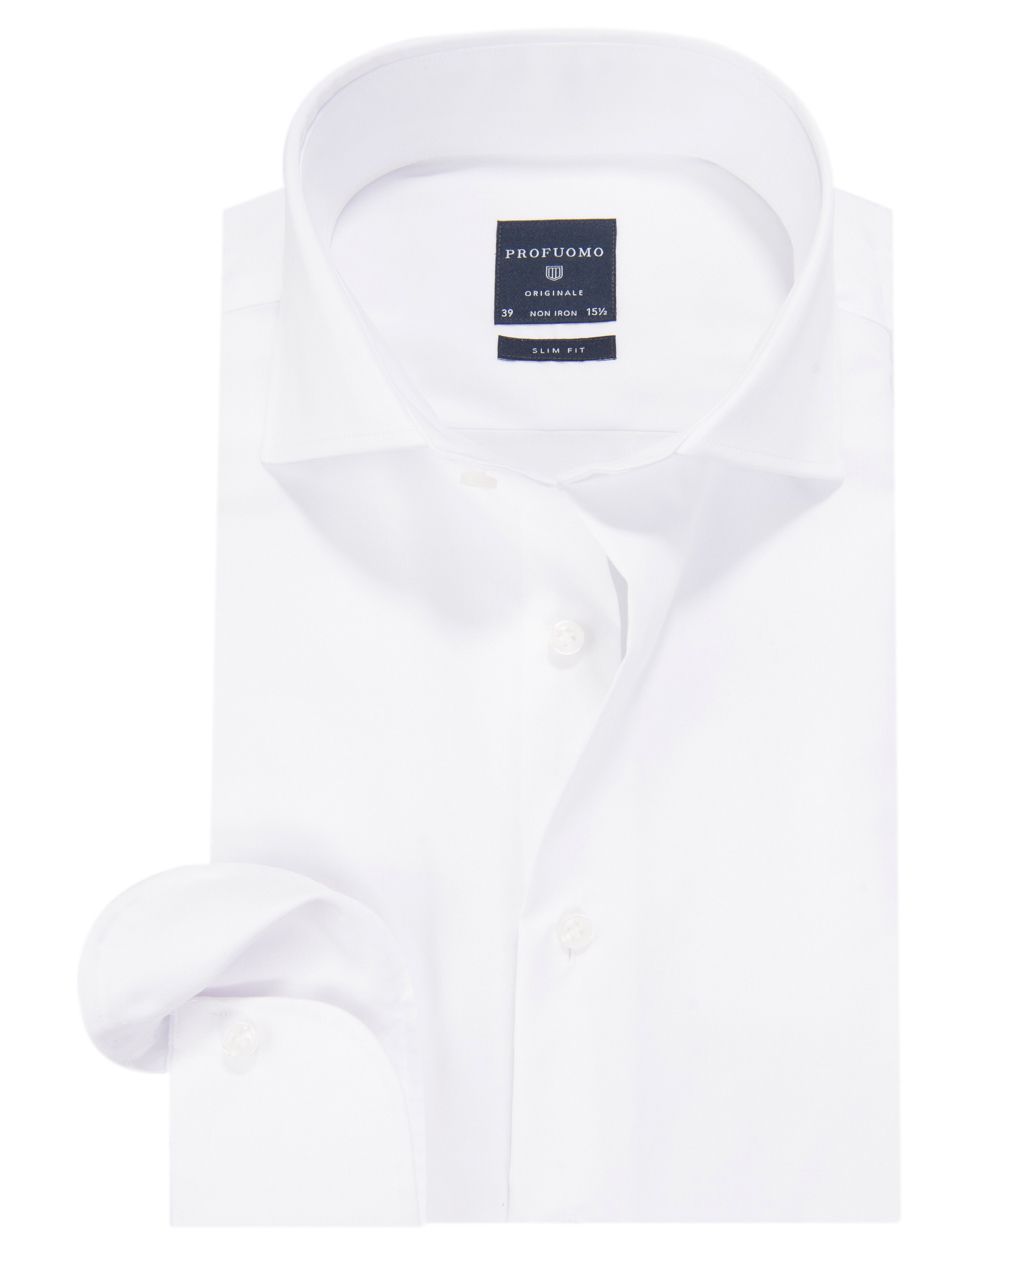 Profuomo Slim fit Overhemd Extra LM Wit 009038-01-37